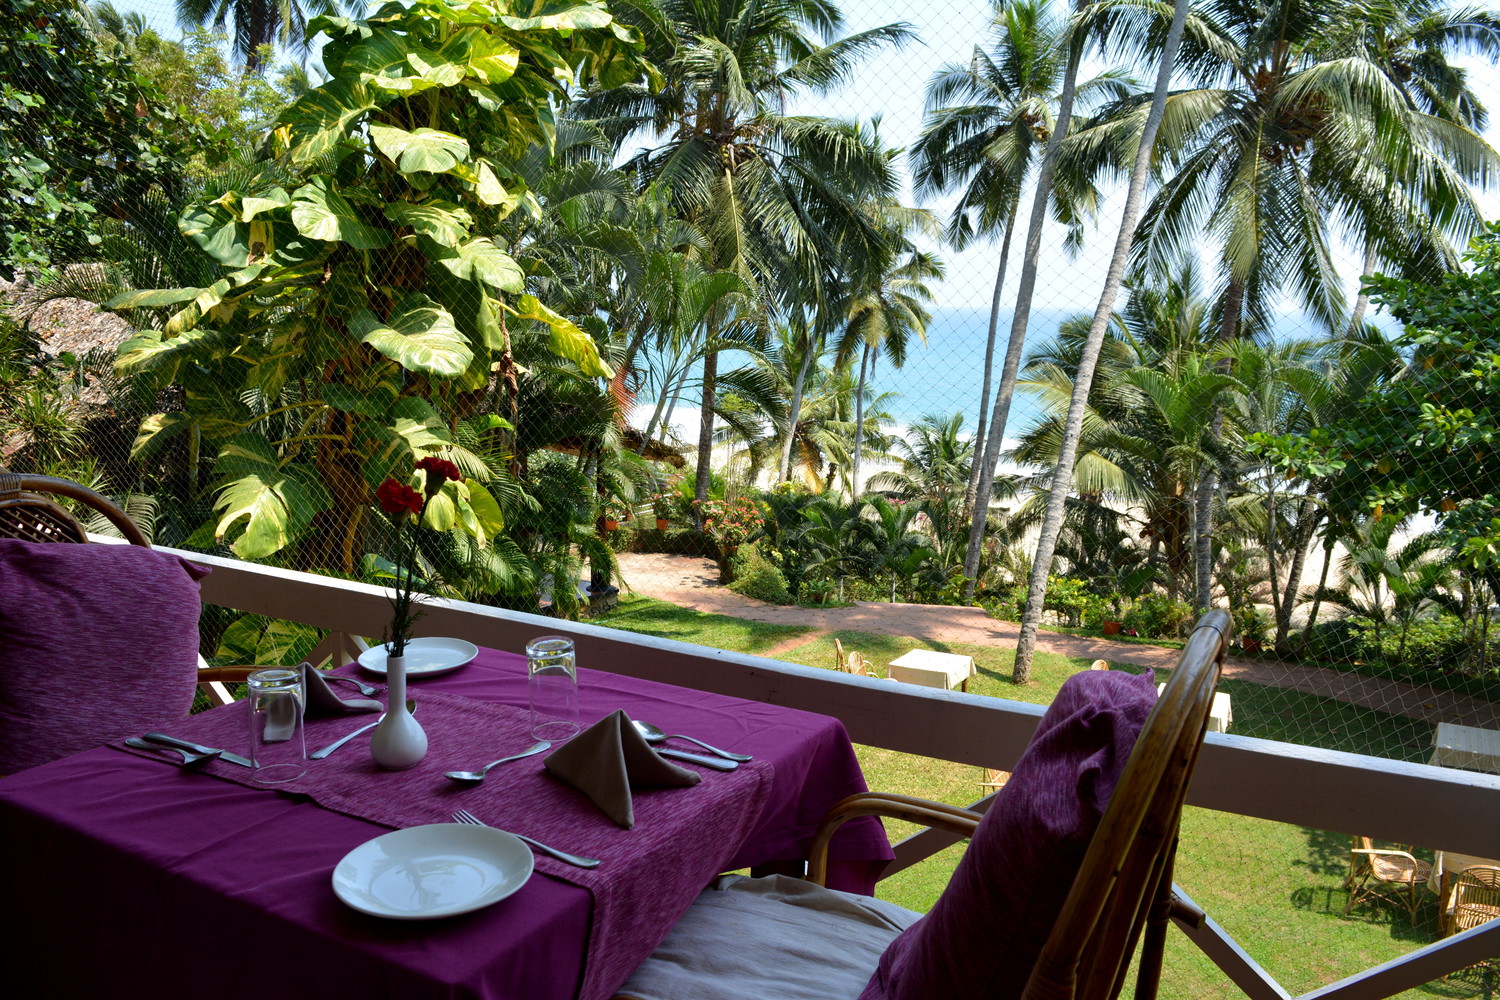 A dining table at the edge of a balcony overlooking green lawns, coconut palm trees, and sea beach below